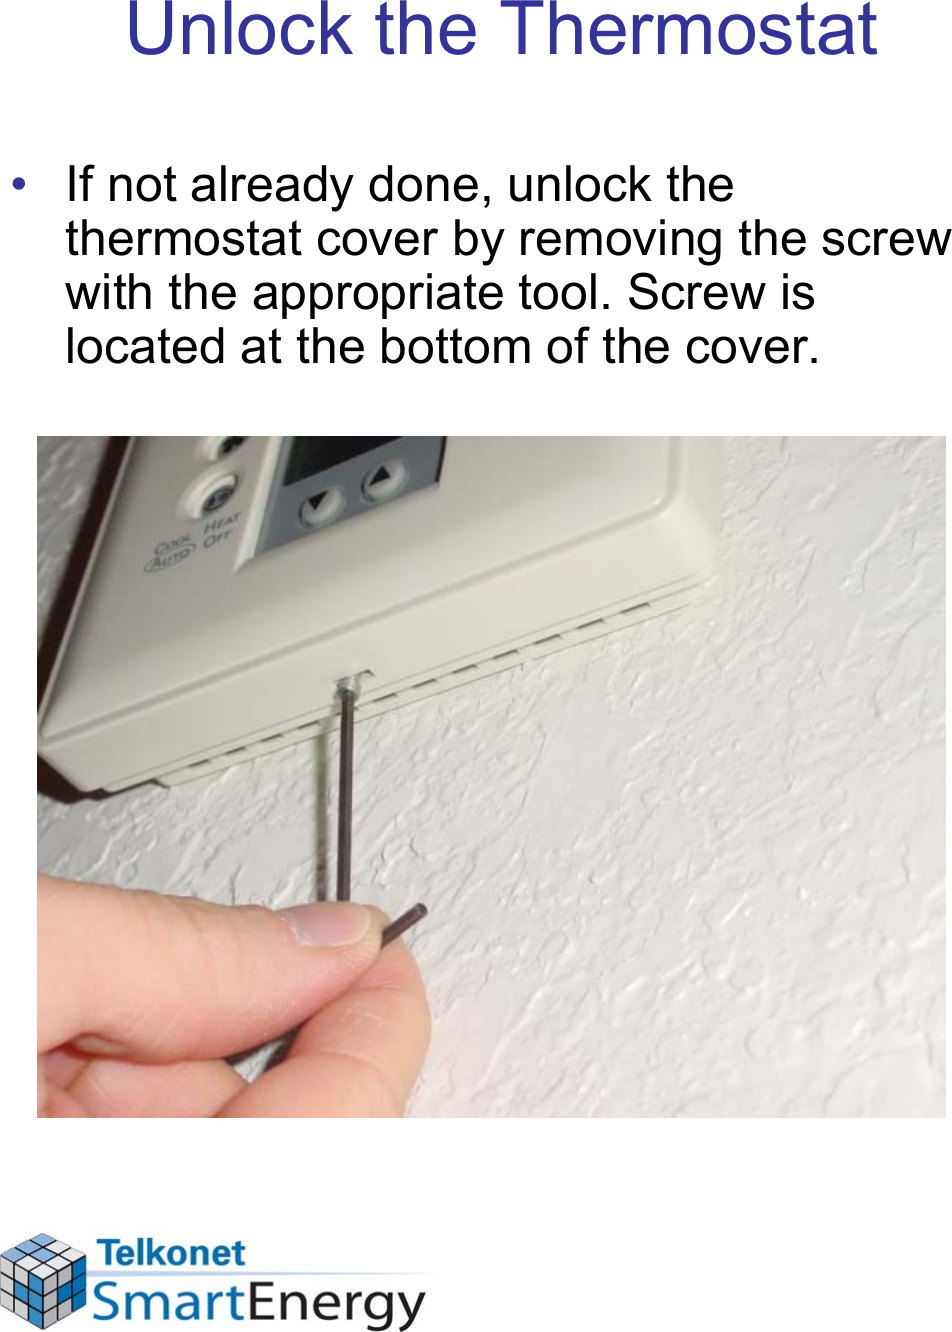 Unlock the Thermostat• If not already done, unlock the thermostat cover by removing the screw with the appropriate tool. Screw is located at the bottom of the cover.